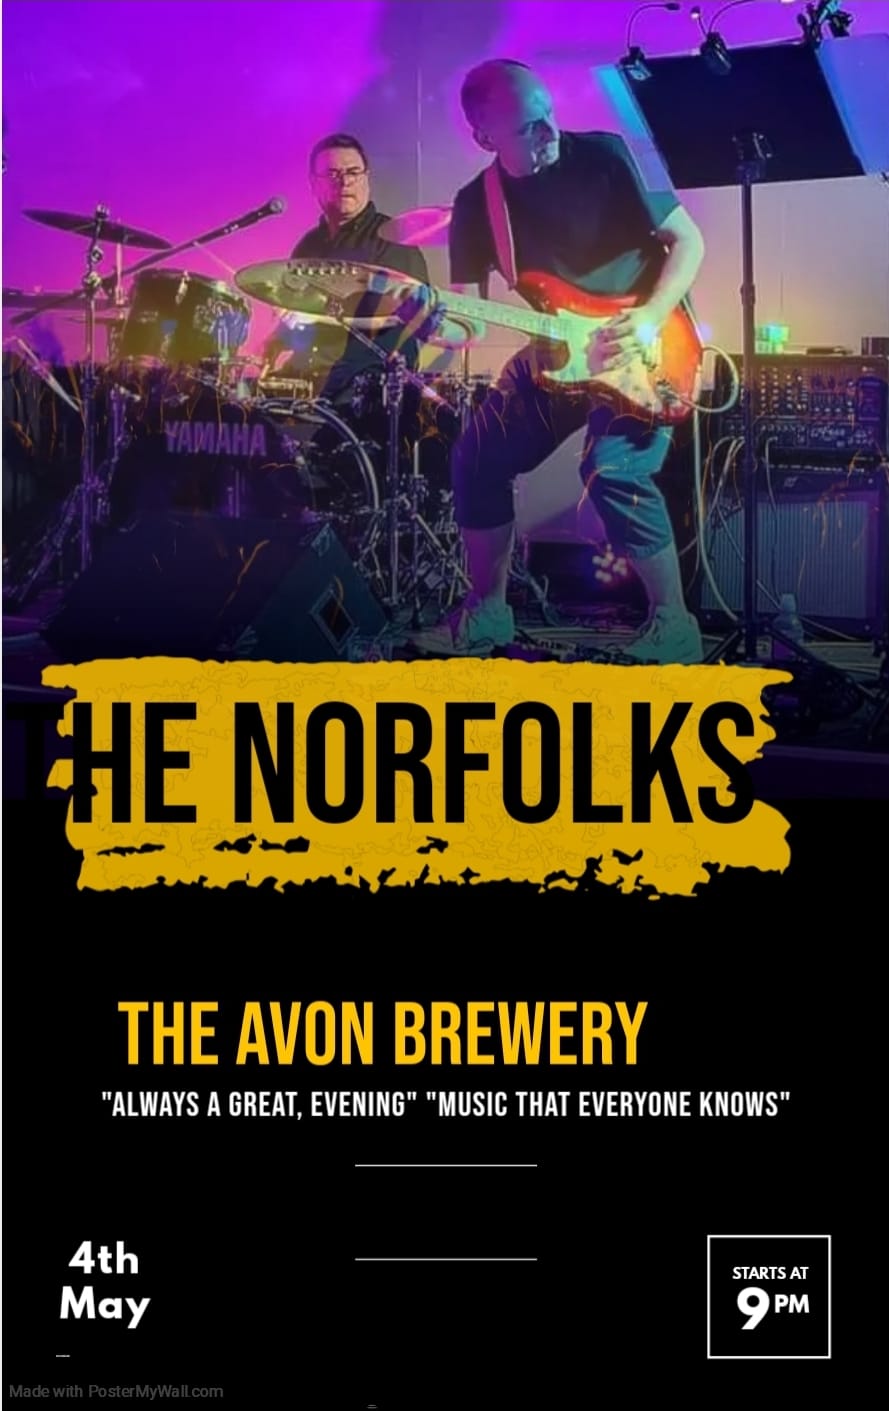 The Norfolks